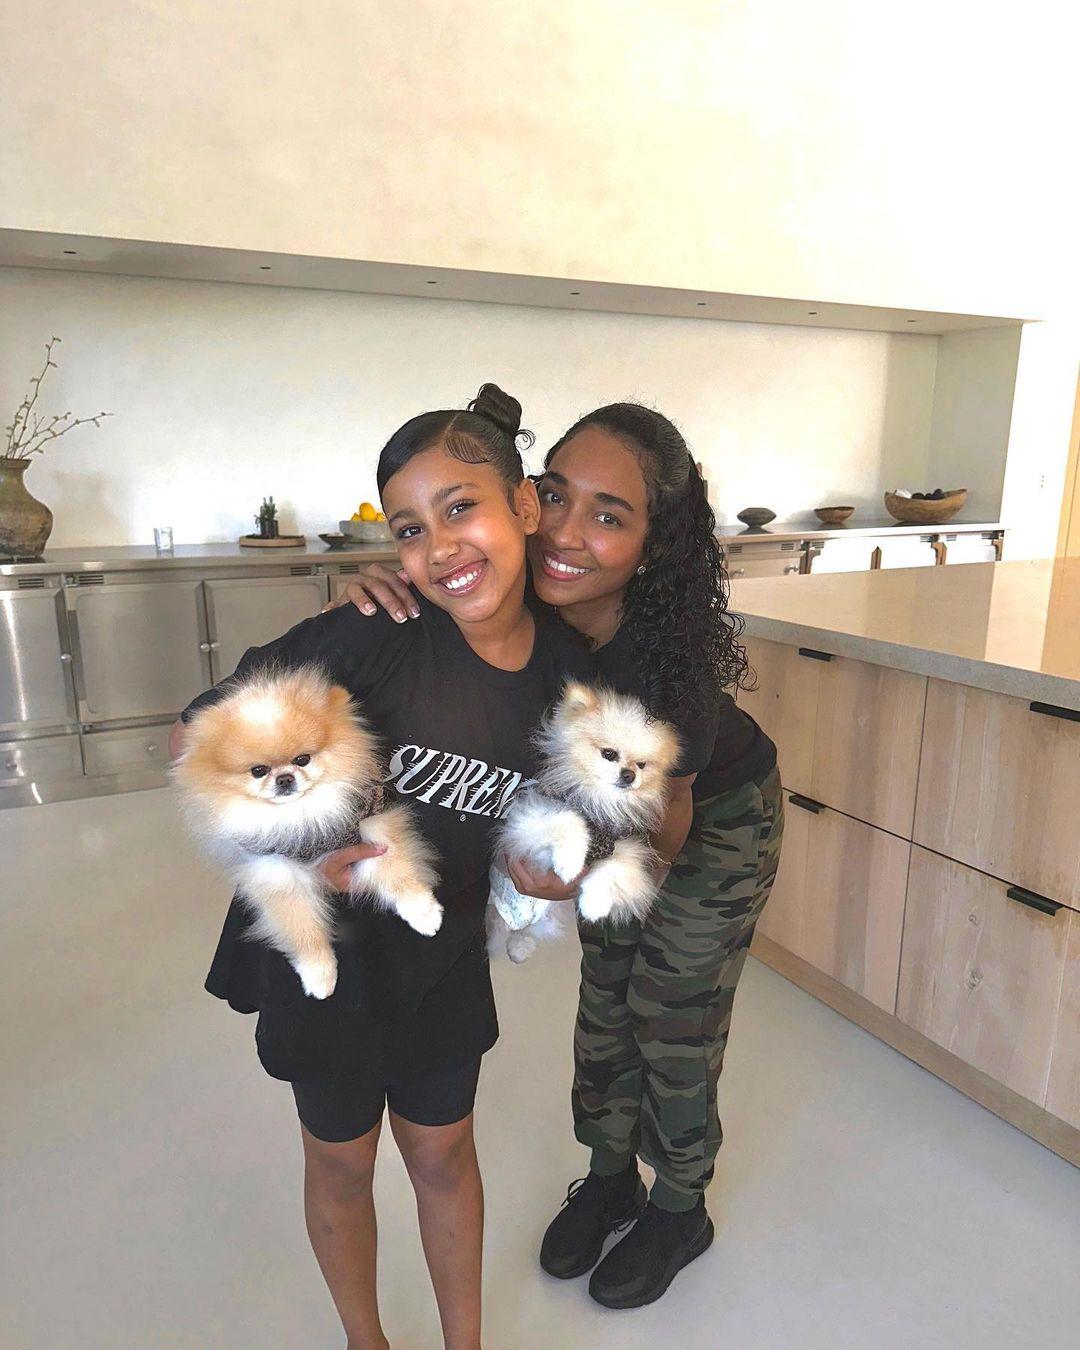 Fans In Awe Of Chilli's Youthfulness As North West's 'Dreams Come True'